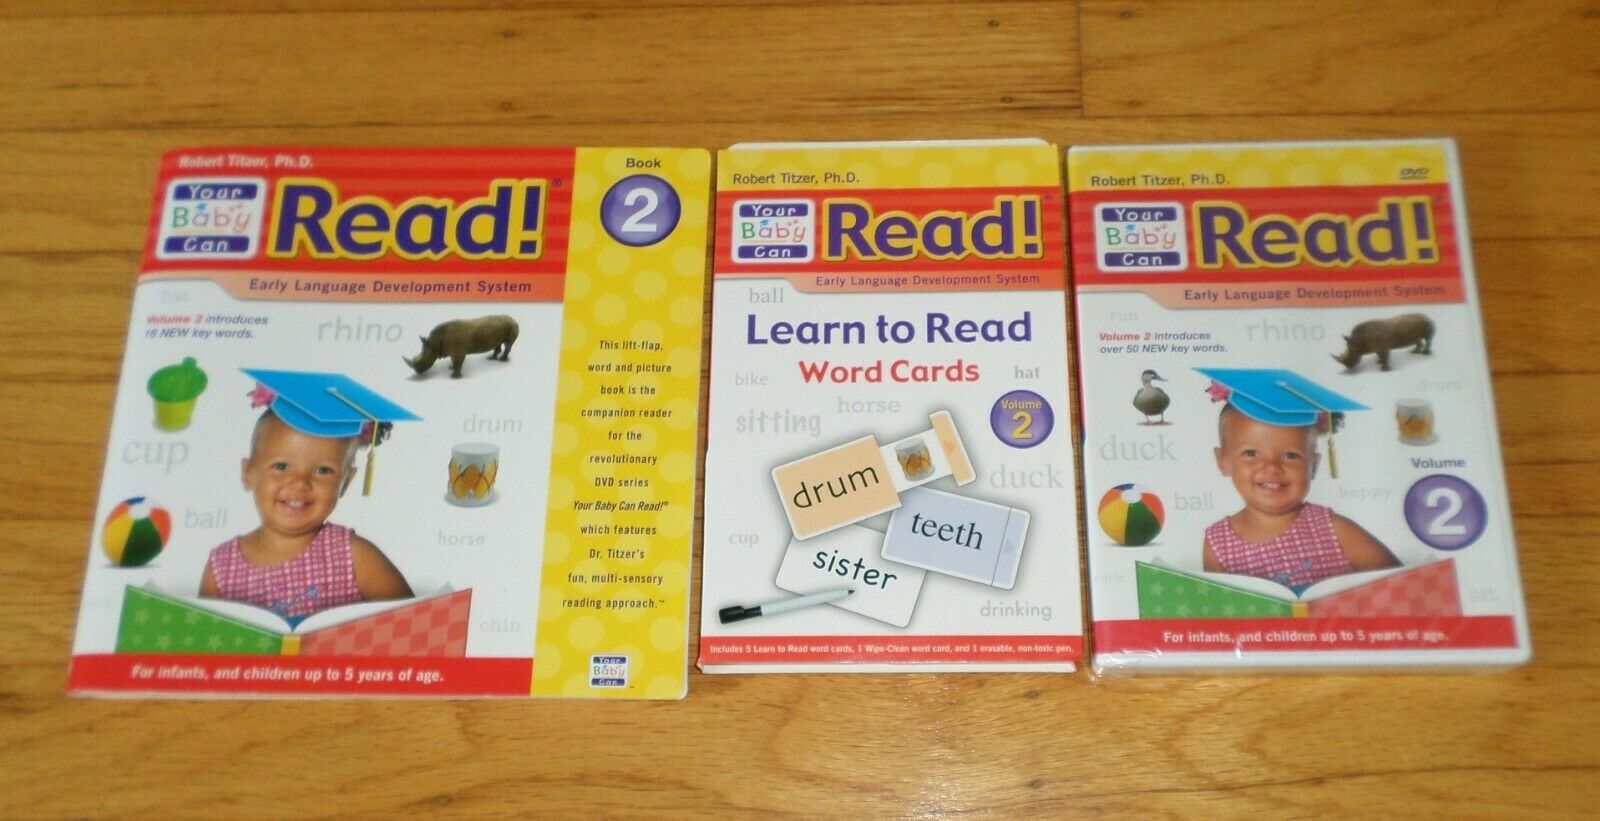 Your Baby Can Read by Robert Titzer Ph.D Volume 2 Book & Word Cards + DVD